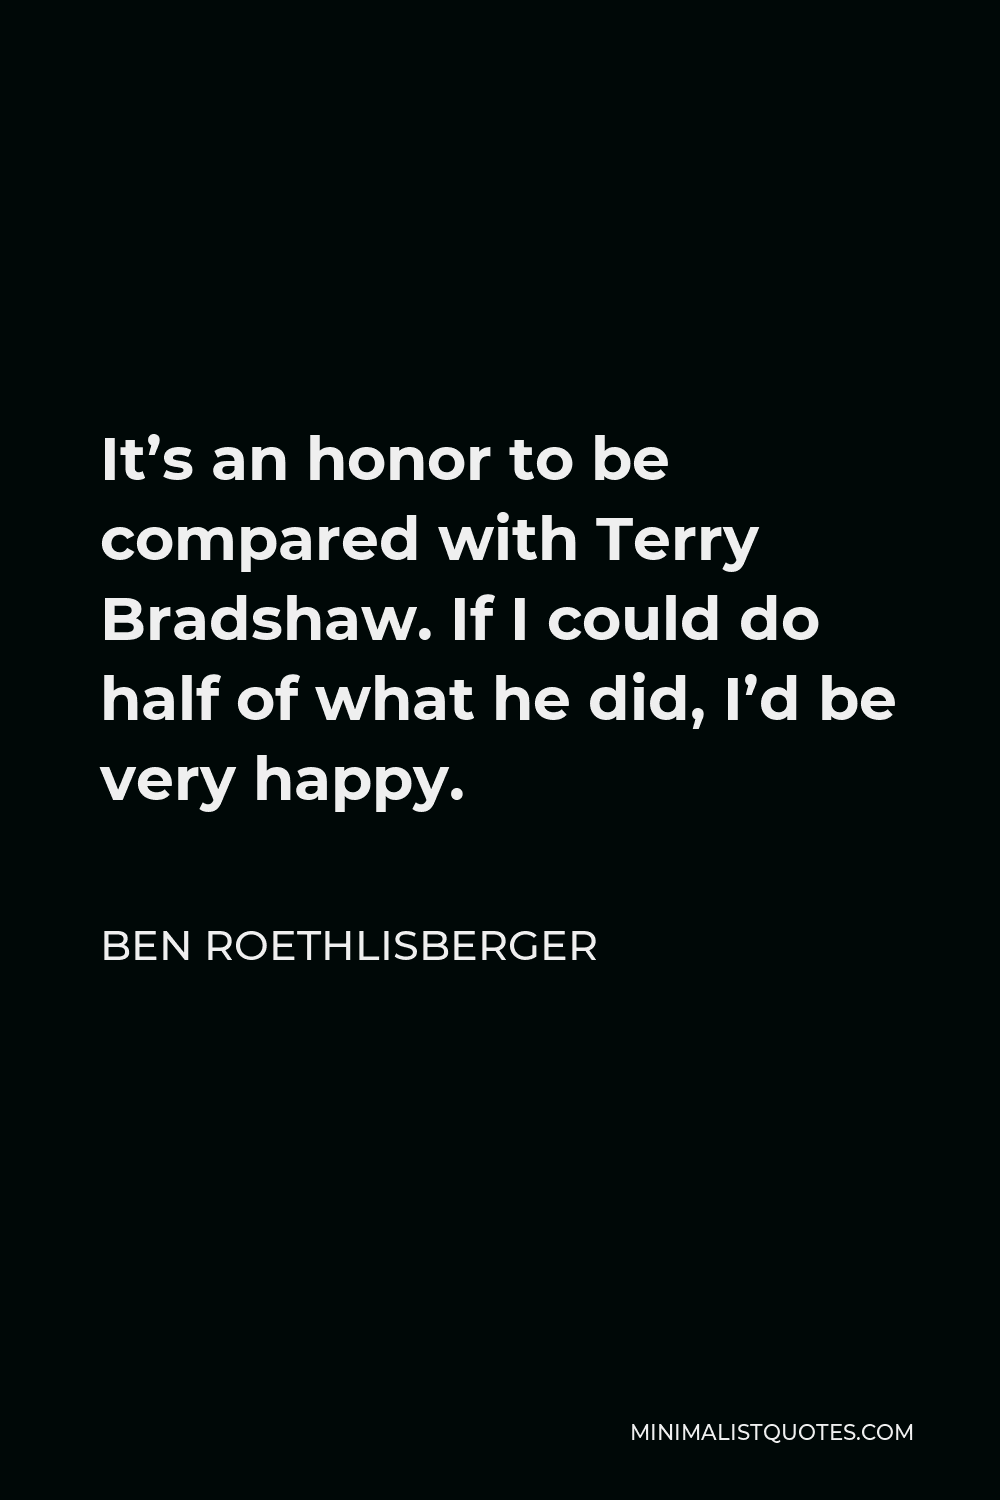 Ben Roethlisberger Quote - It’s an honor to be compared with Terry Bradshaw. If I could do half of what he did, I’d be very happy.